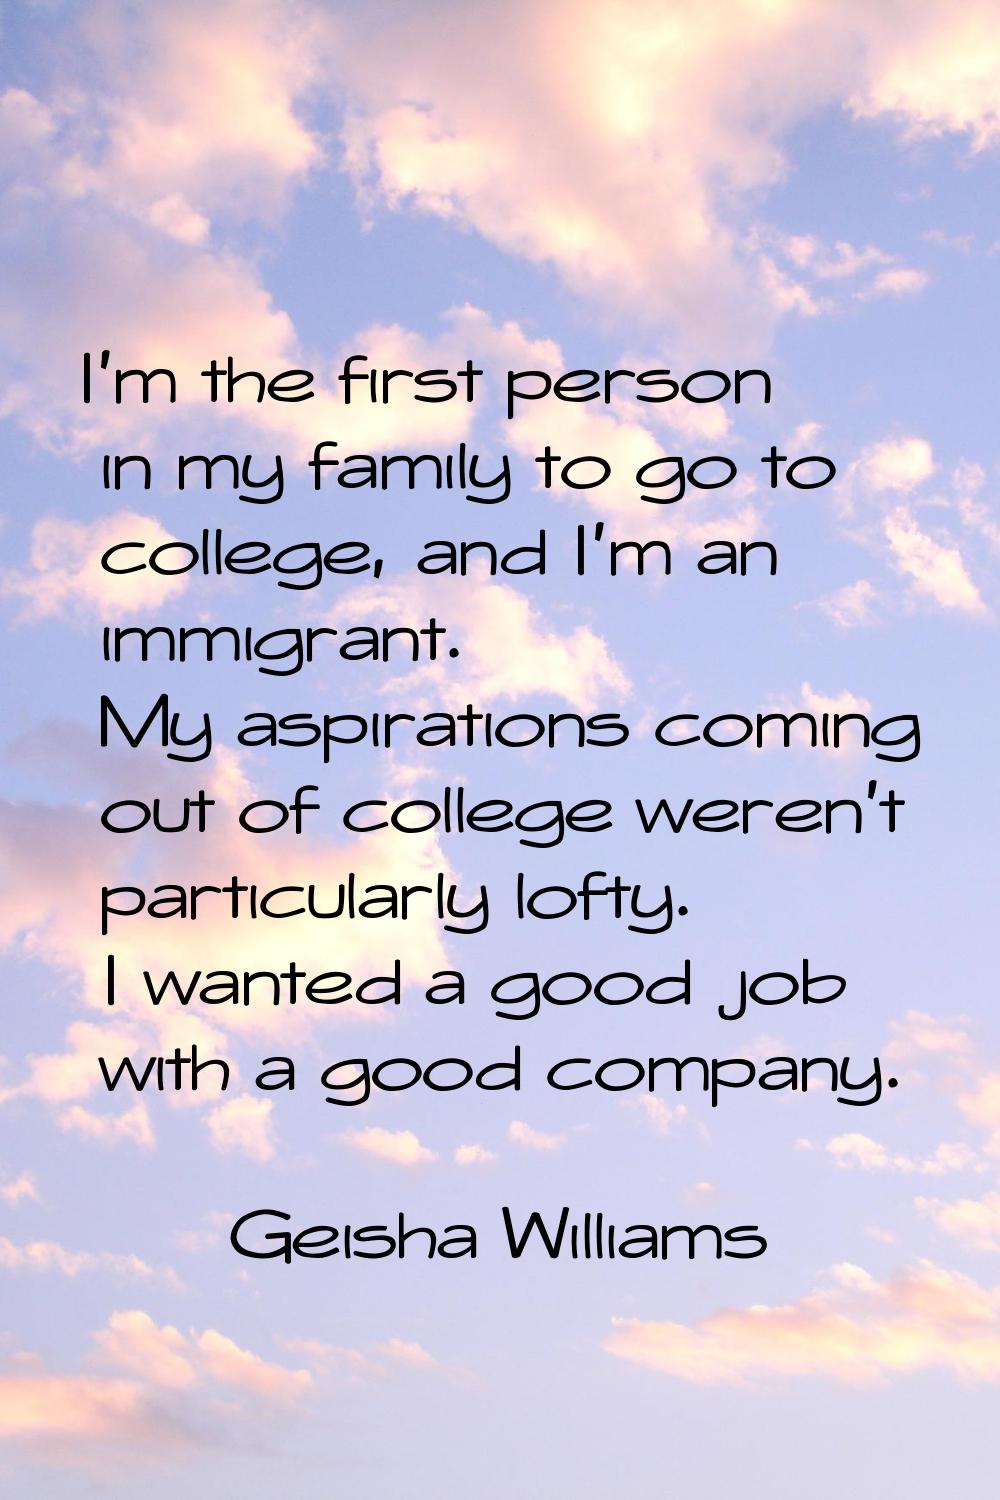 I'm the first person in my family to go to college, and I'm an immigrant. My aspirations coming out